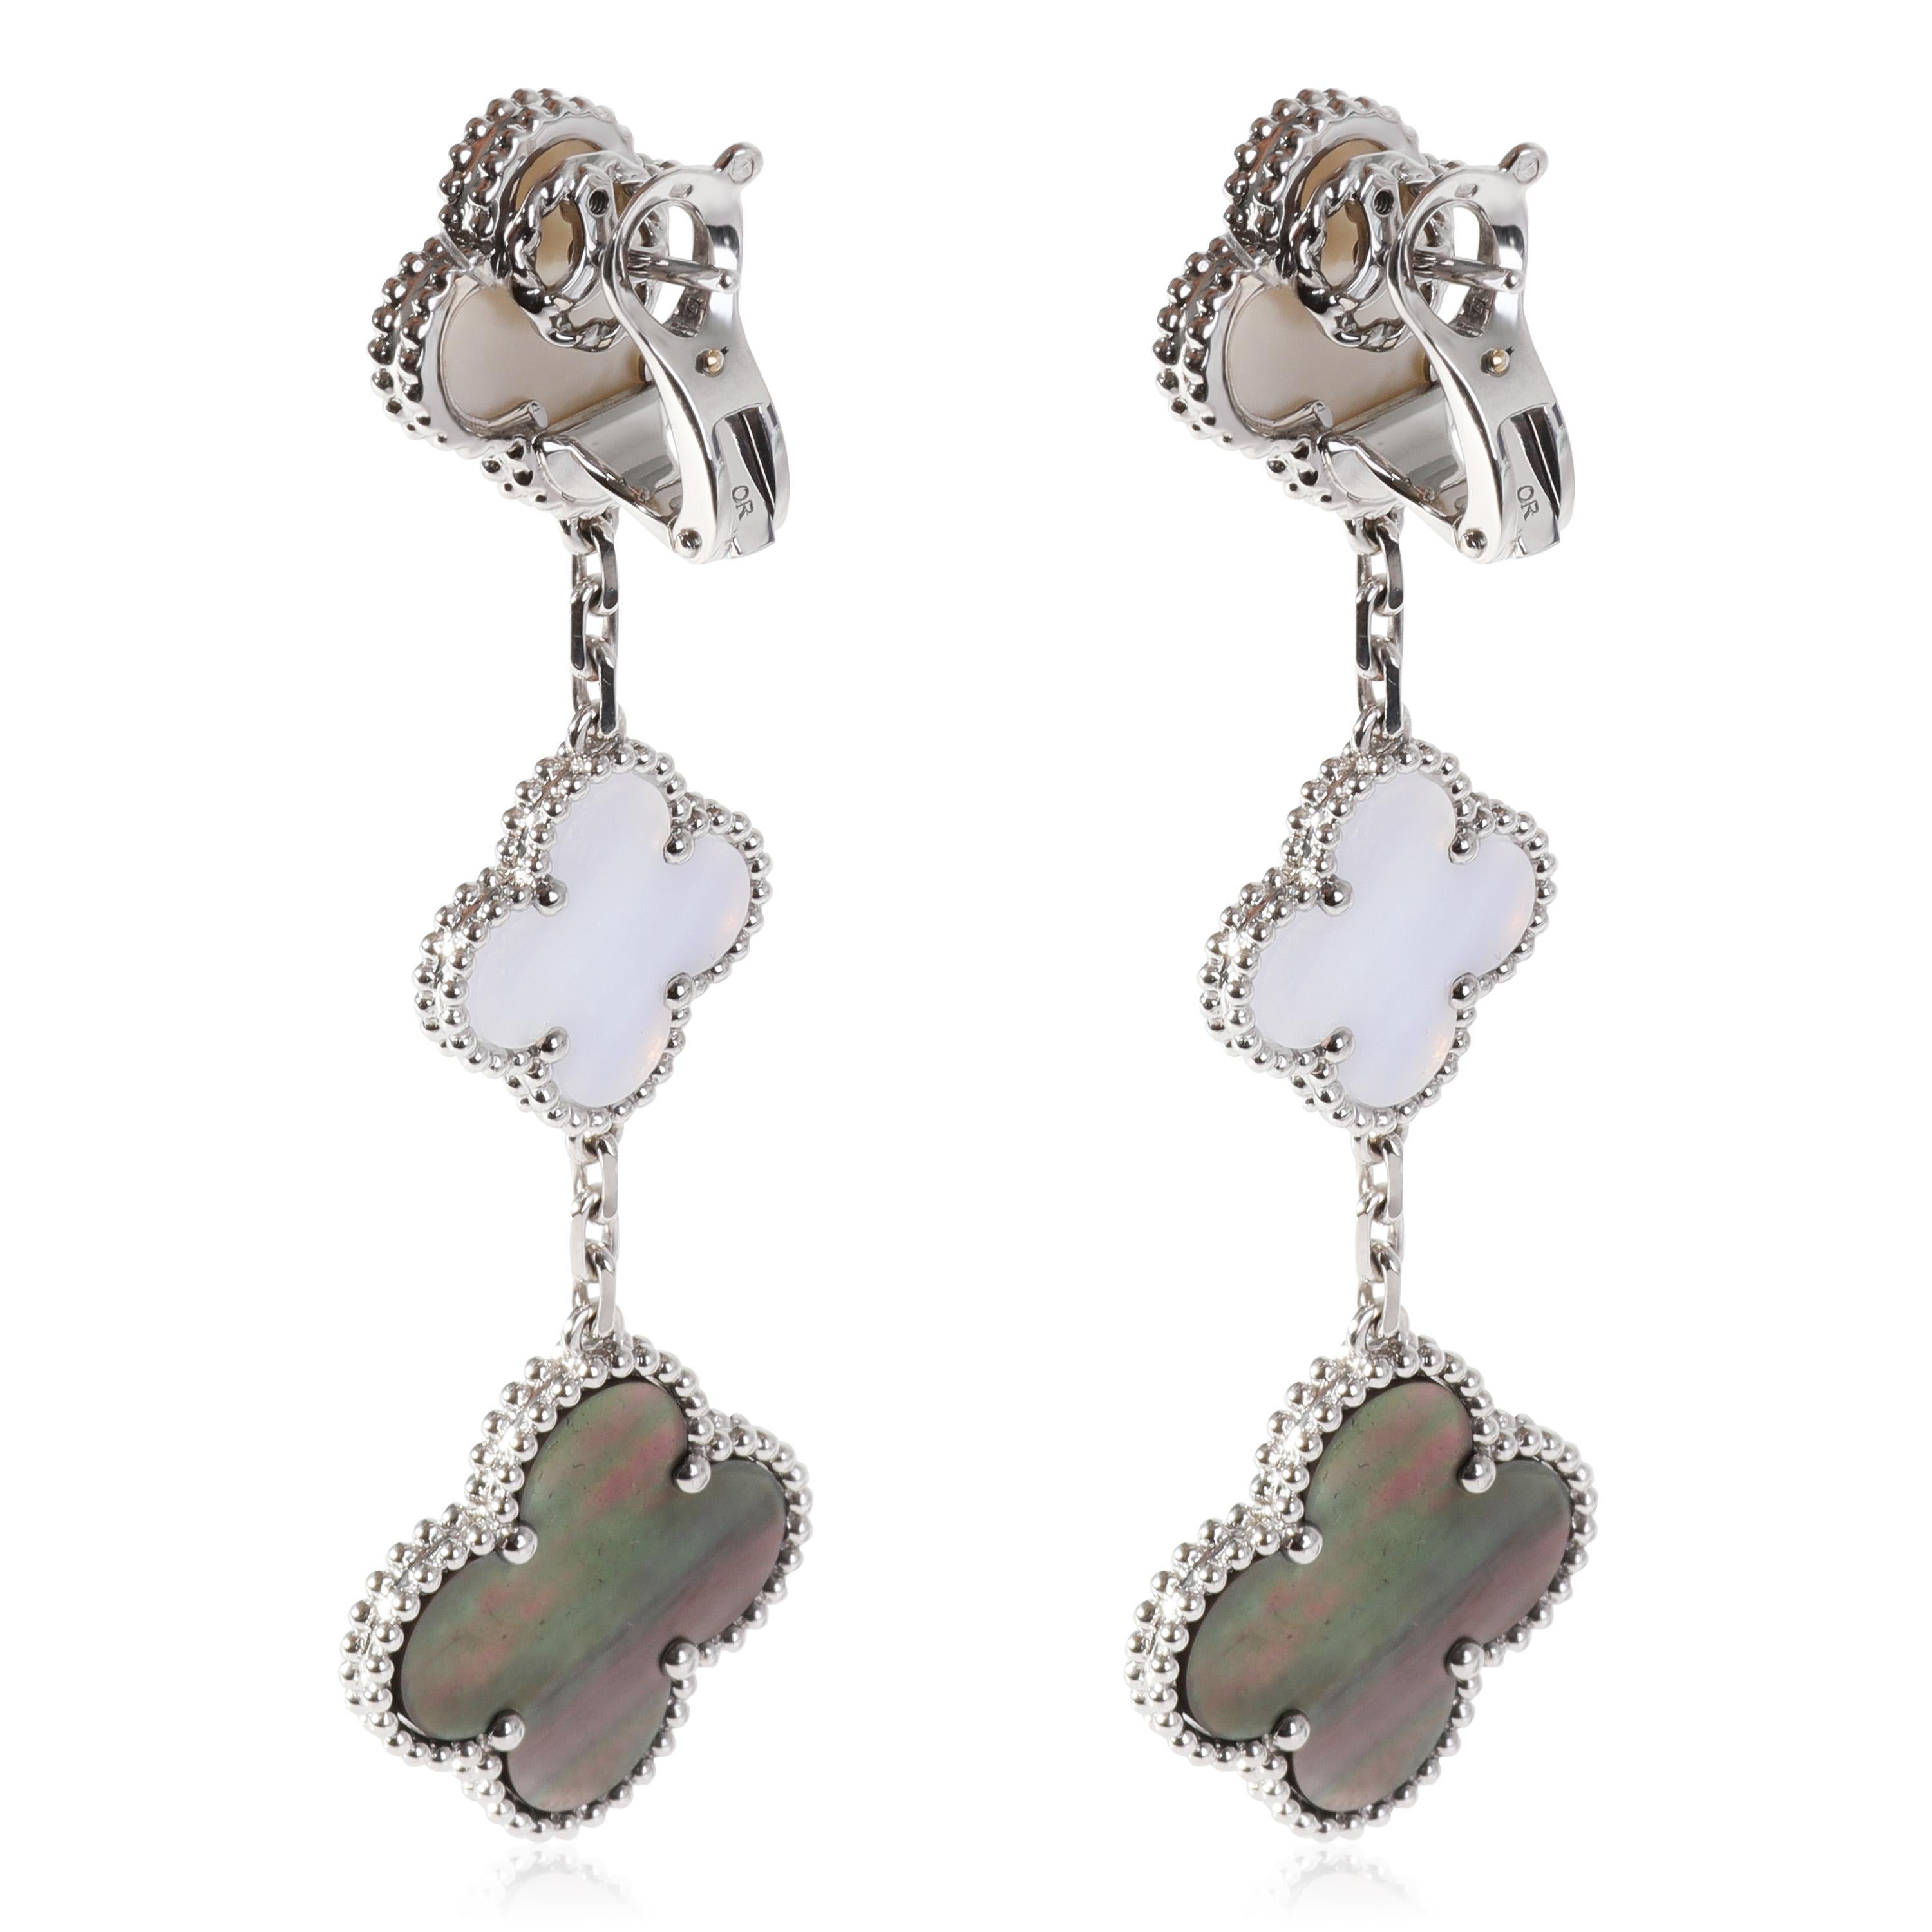 Van Cleef & Arpels Magic Alhambra White and Black Mother of Pearl  Earrings

PRIMARY DETAILS
SKU: 118990
Listing Title: Van Cleef & Arpels Magic Alhambra White and Black Mother of Pearl  Earrings
Condition Description: Retails for 9550 USD. In